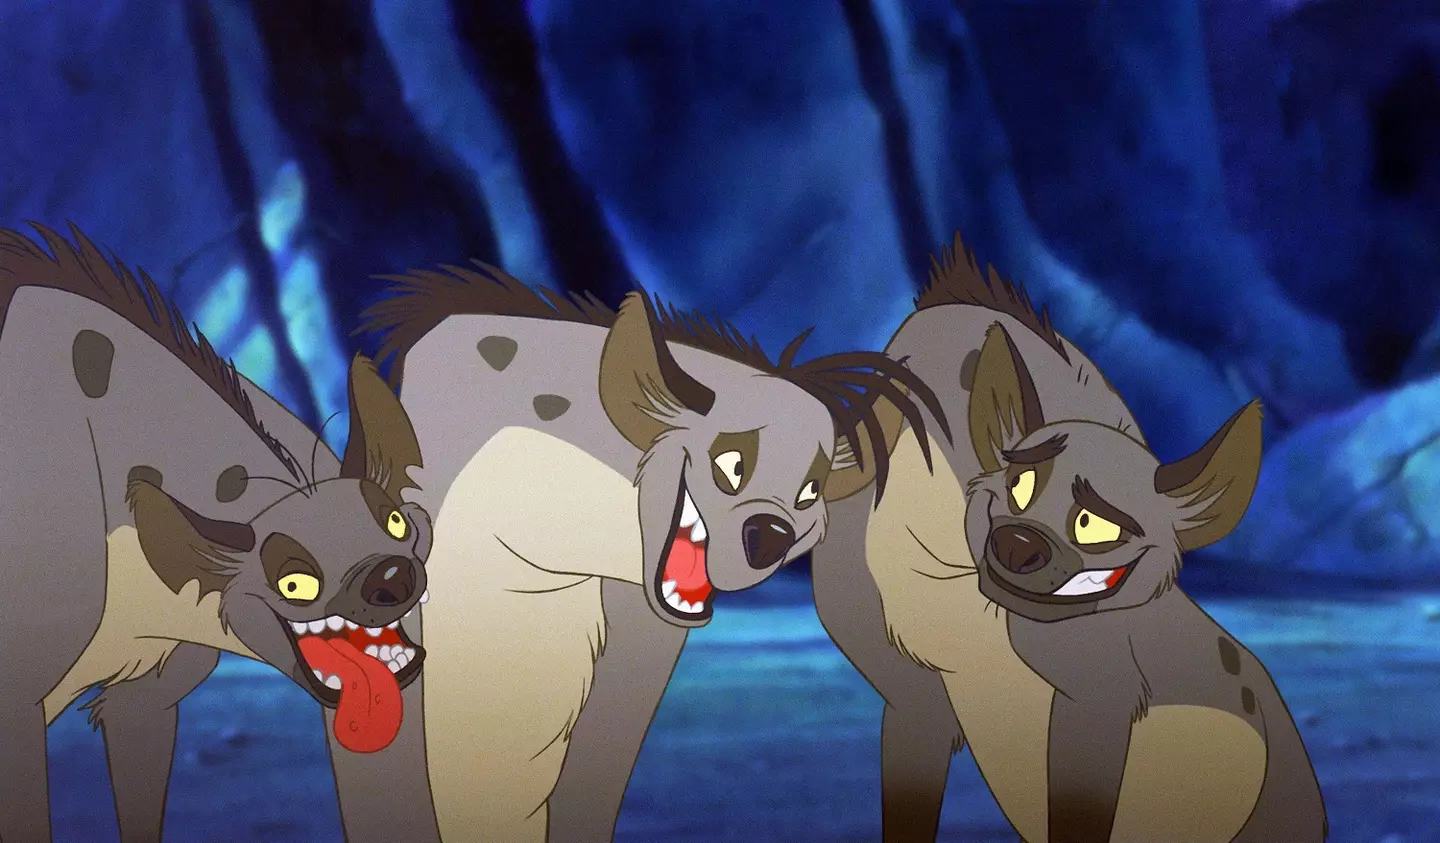 A biologist sued Disney over the portrayal of hyenas in The Lion King.